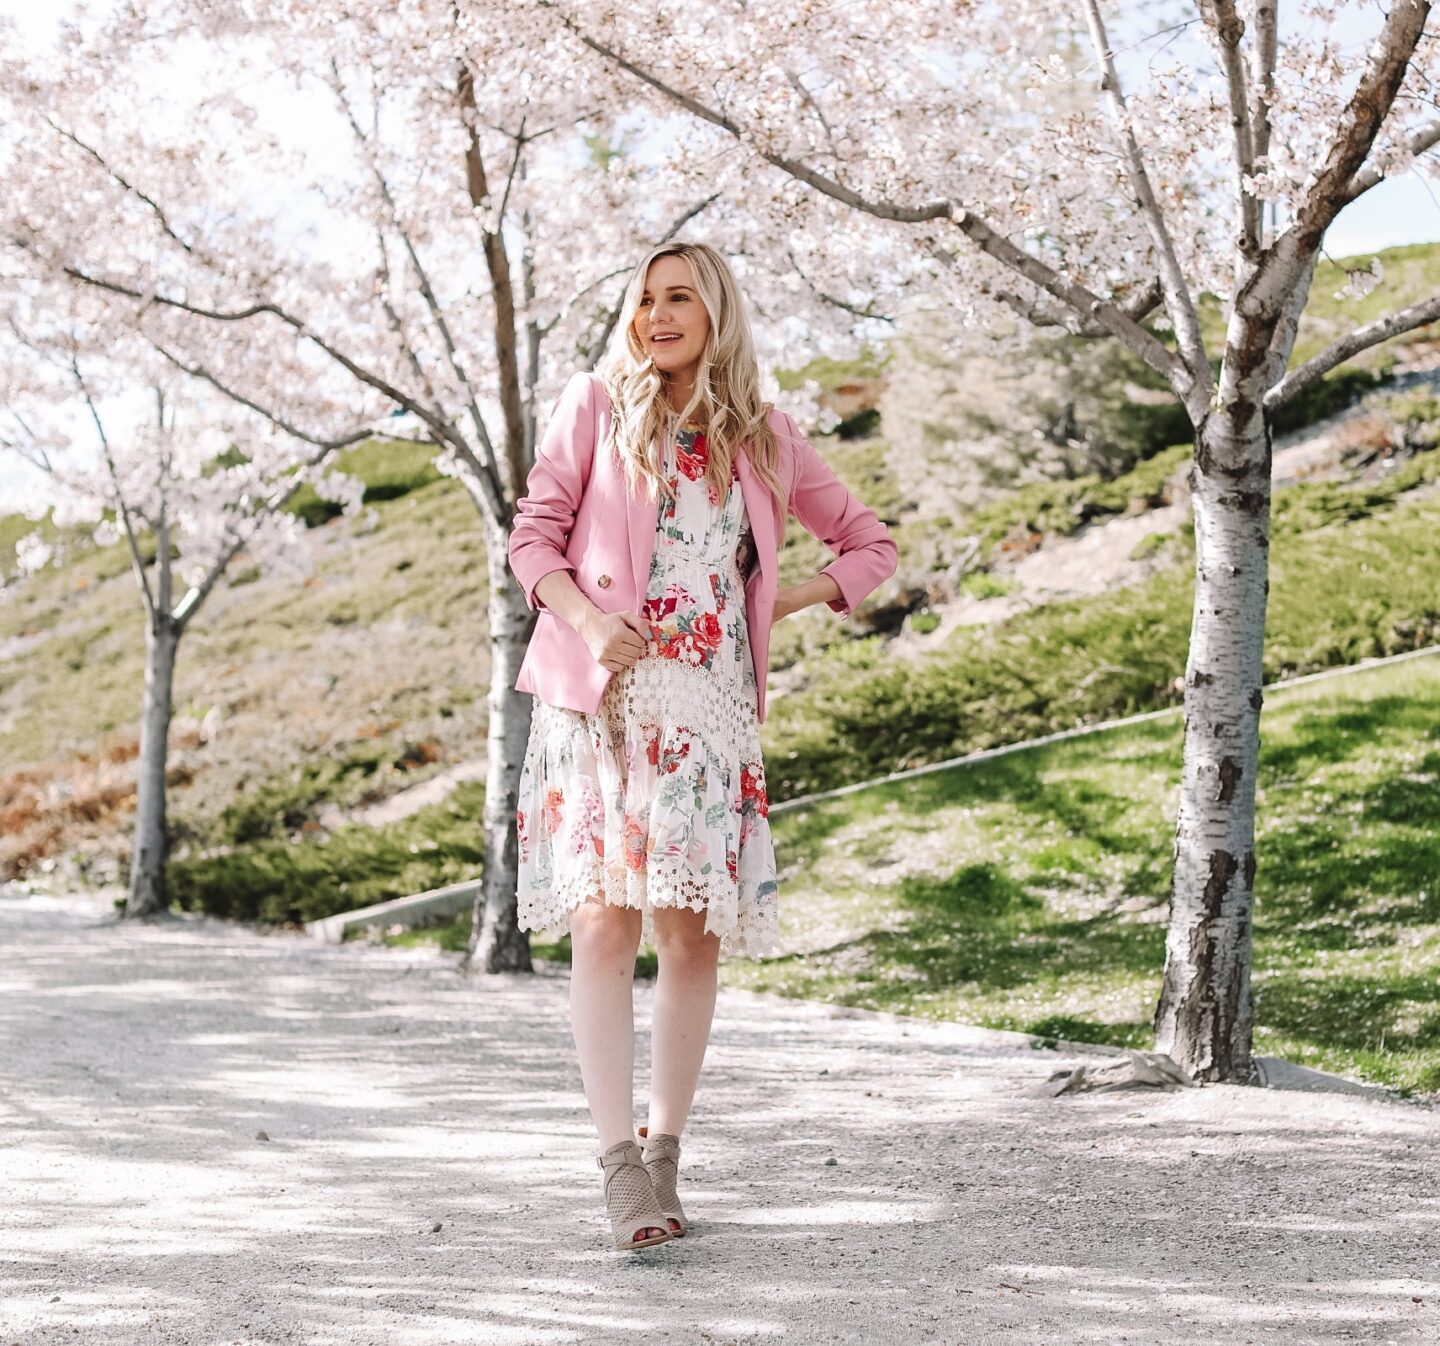 styling a floral dress – 2 ways